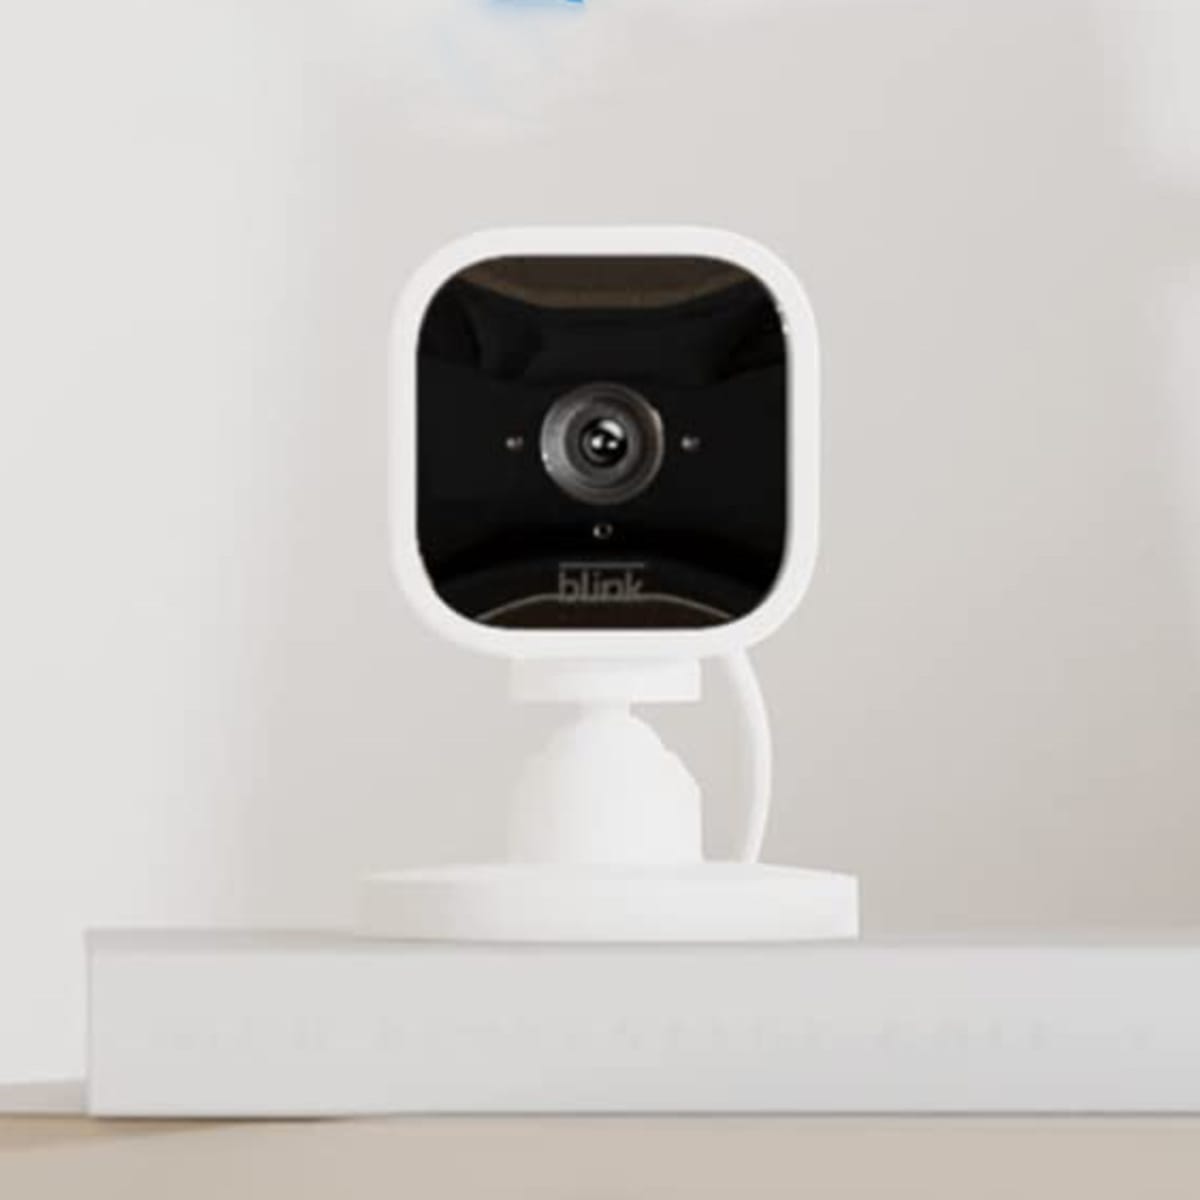 Blink XT2 home security cameras are on sale for $20 off on